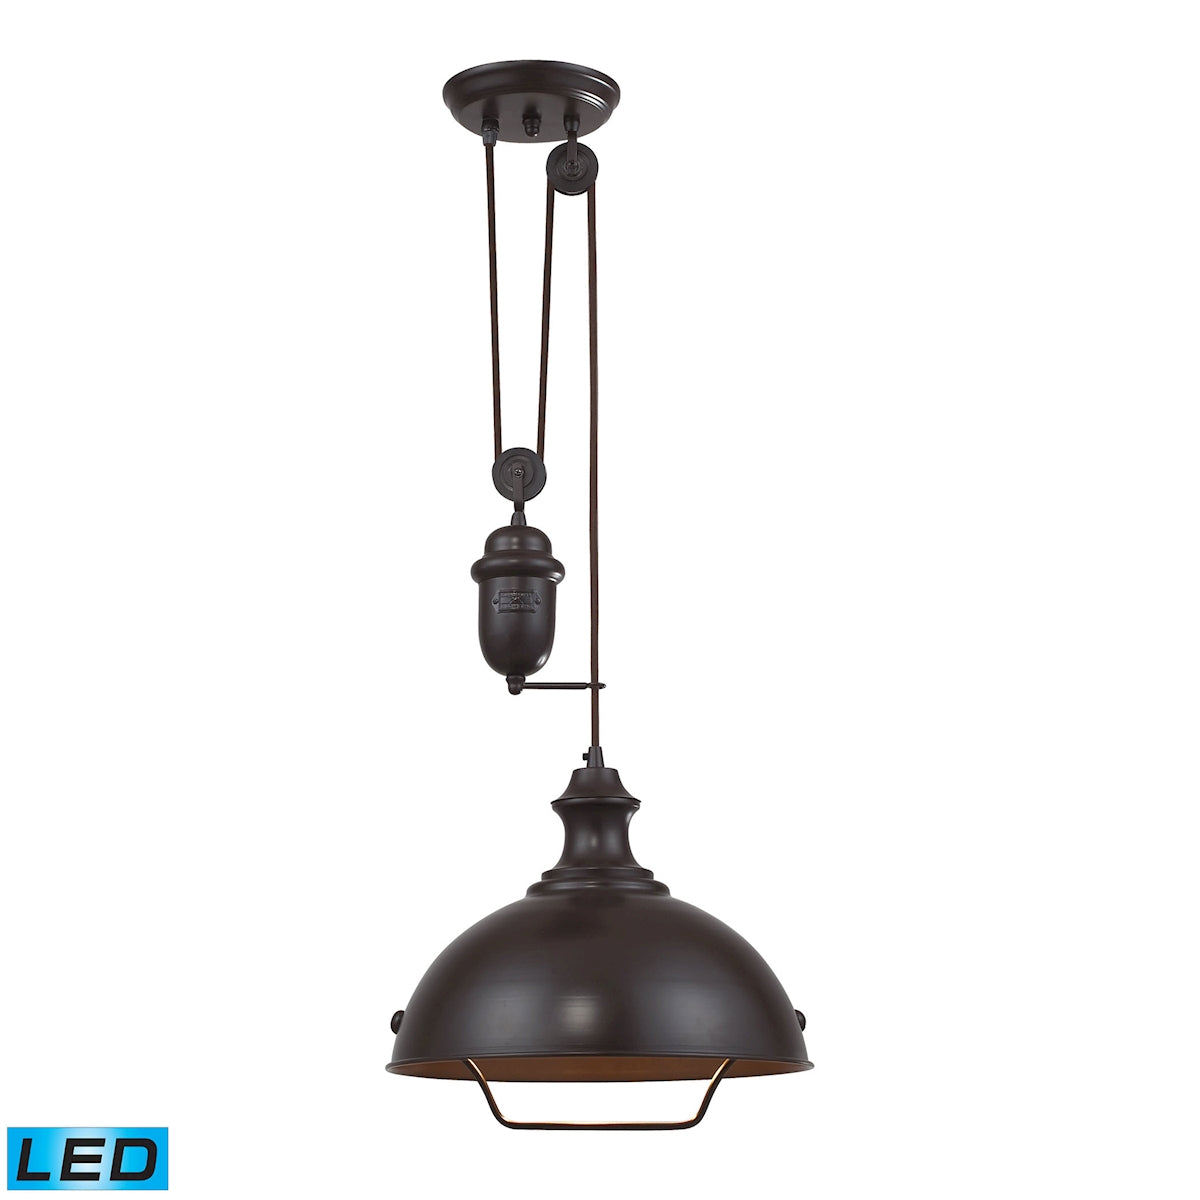 ELK Lighting 65071-1-LED - Farmhouse 1-Light Adjustable Pendant in Oiled Bronze with Matching Shade